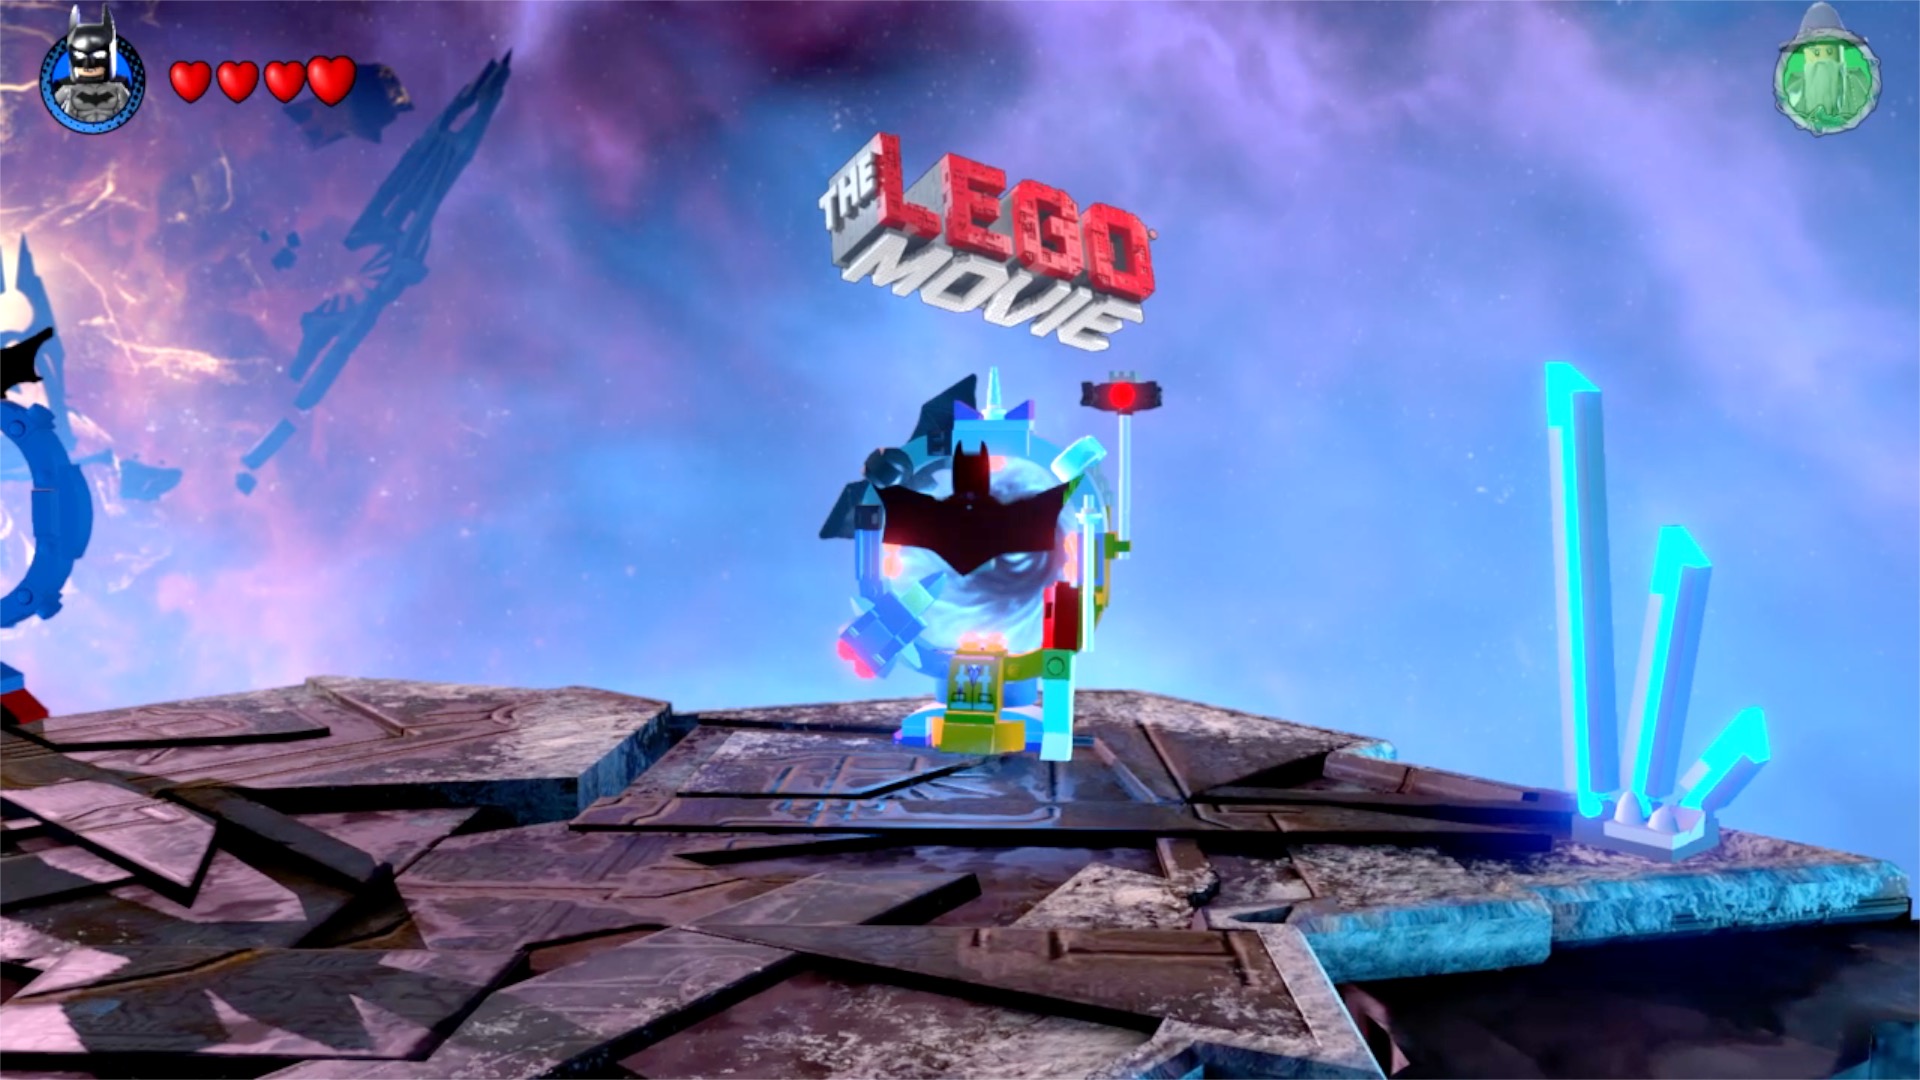 Everything you need to know about The Lego Movie open world in Lego Dimensions